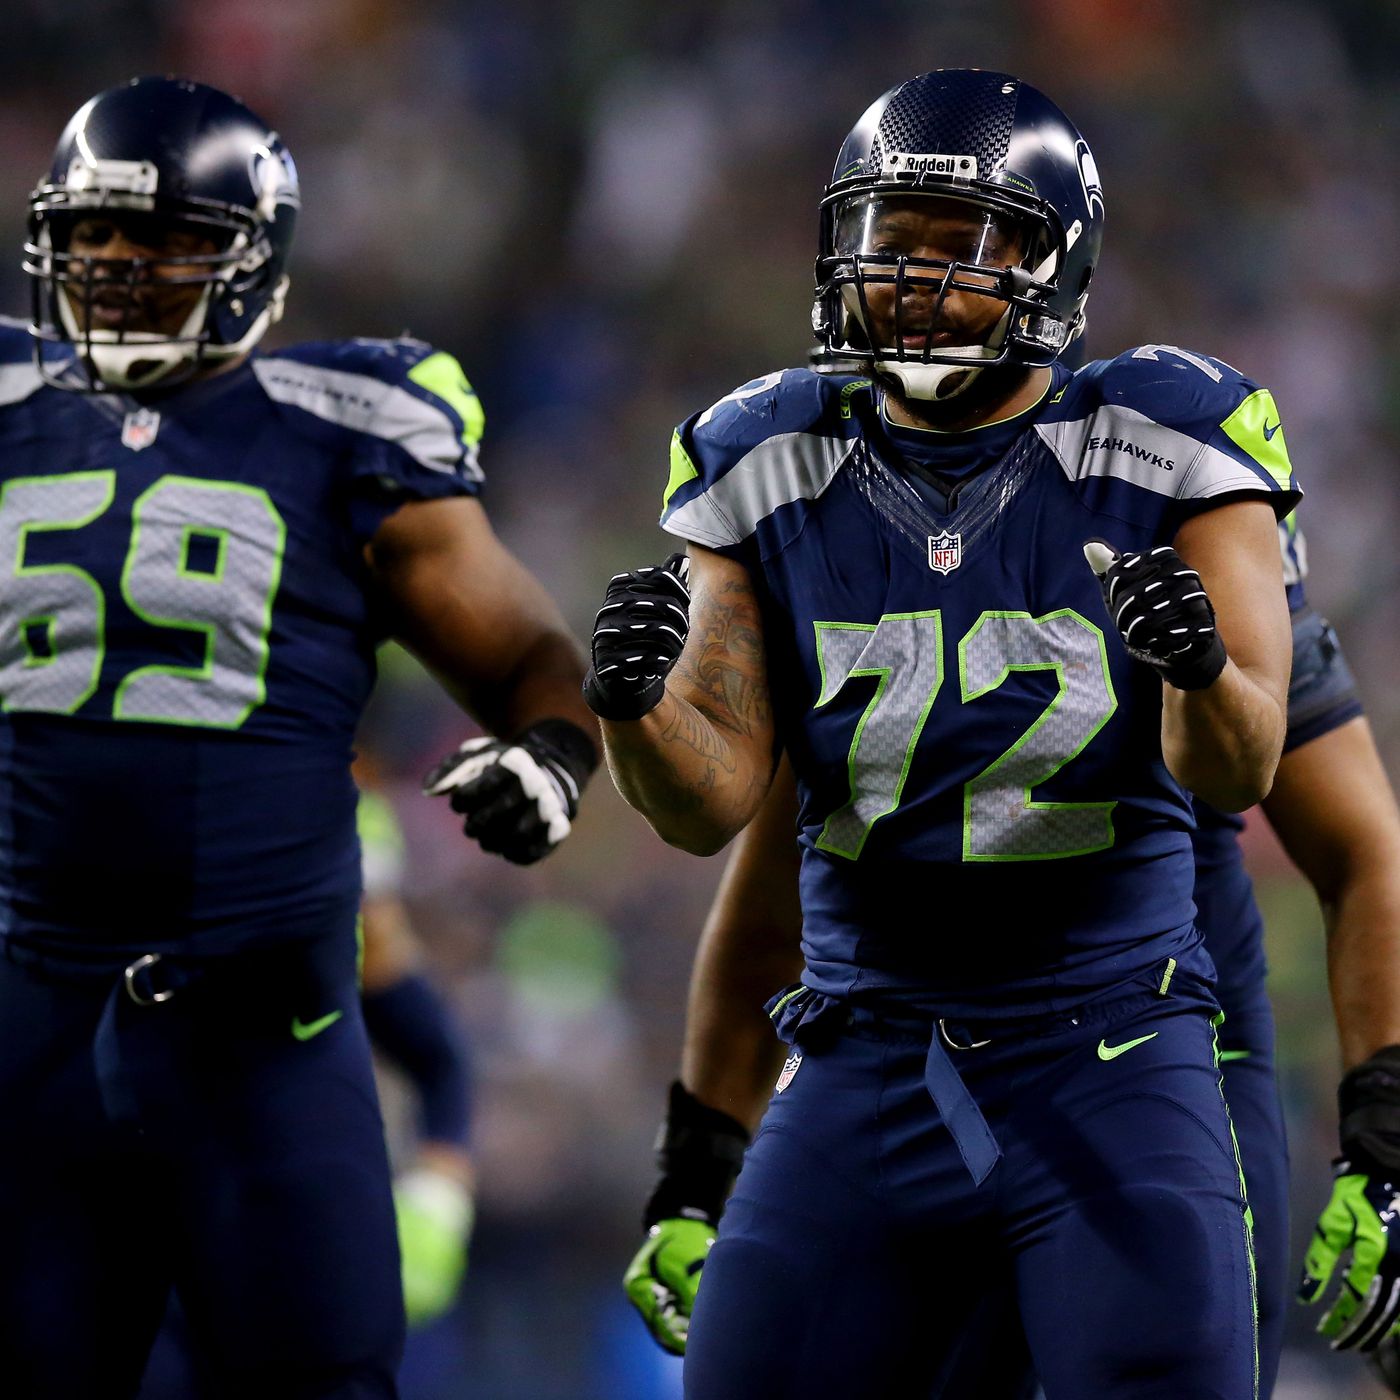 Super Bowl 48 results: Champion Seahawks could supply Jaguars with